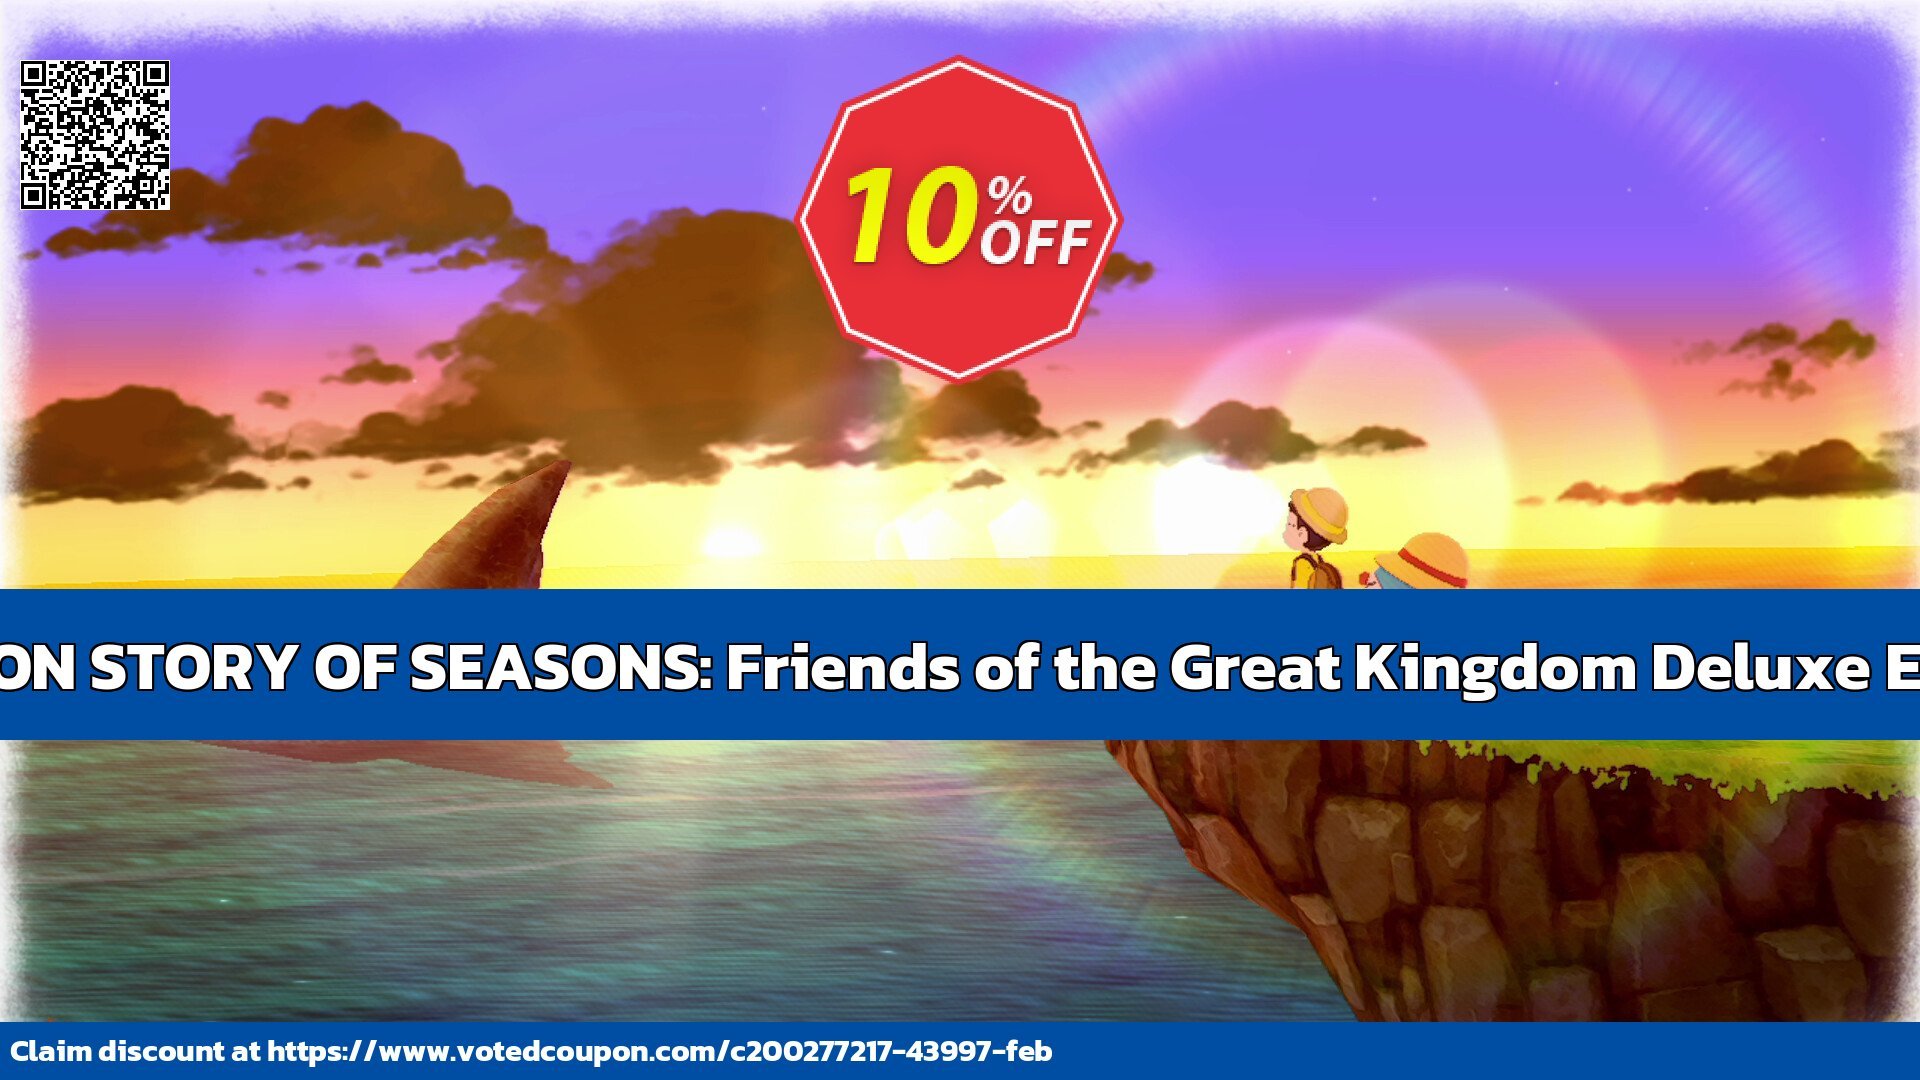 DORAEMON STORY OF SEASONS: Friends of the Great Kingdom Deluxe Edition PC Coupon Code May 2024, 10% OFF - VotedCoupon